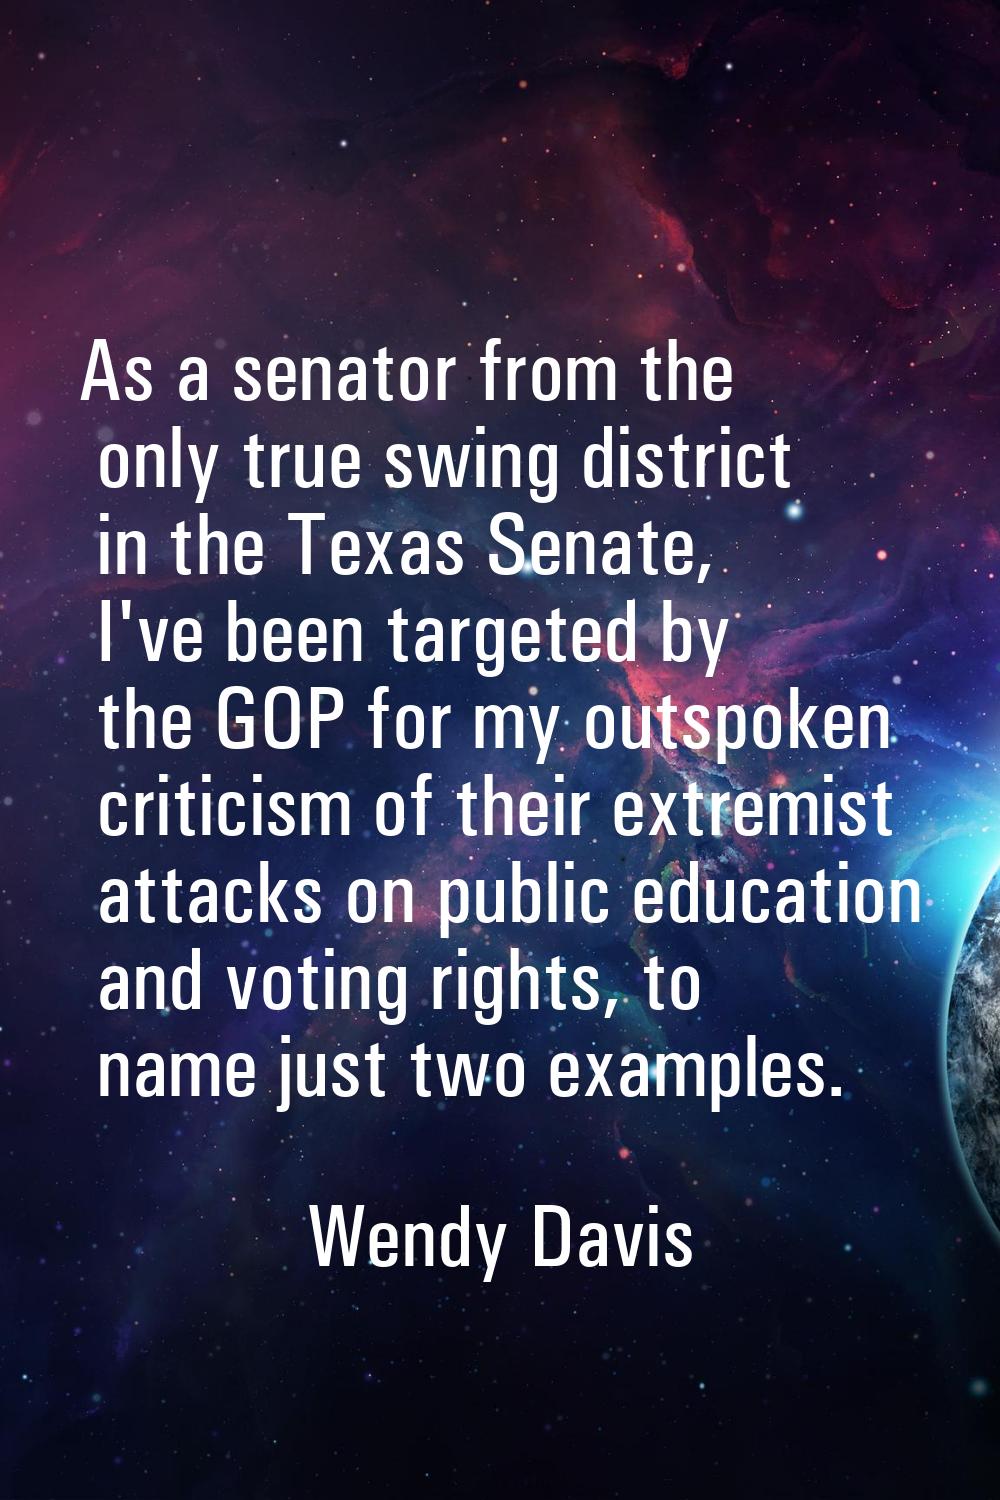 As a senator from the only true swing district in the Texas Senate, I've been targeted by the GOP f